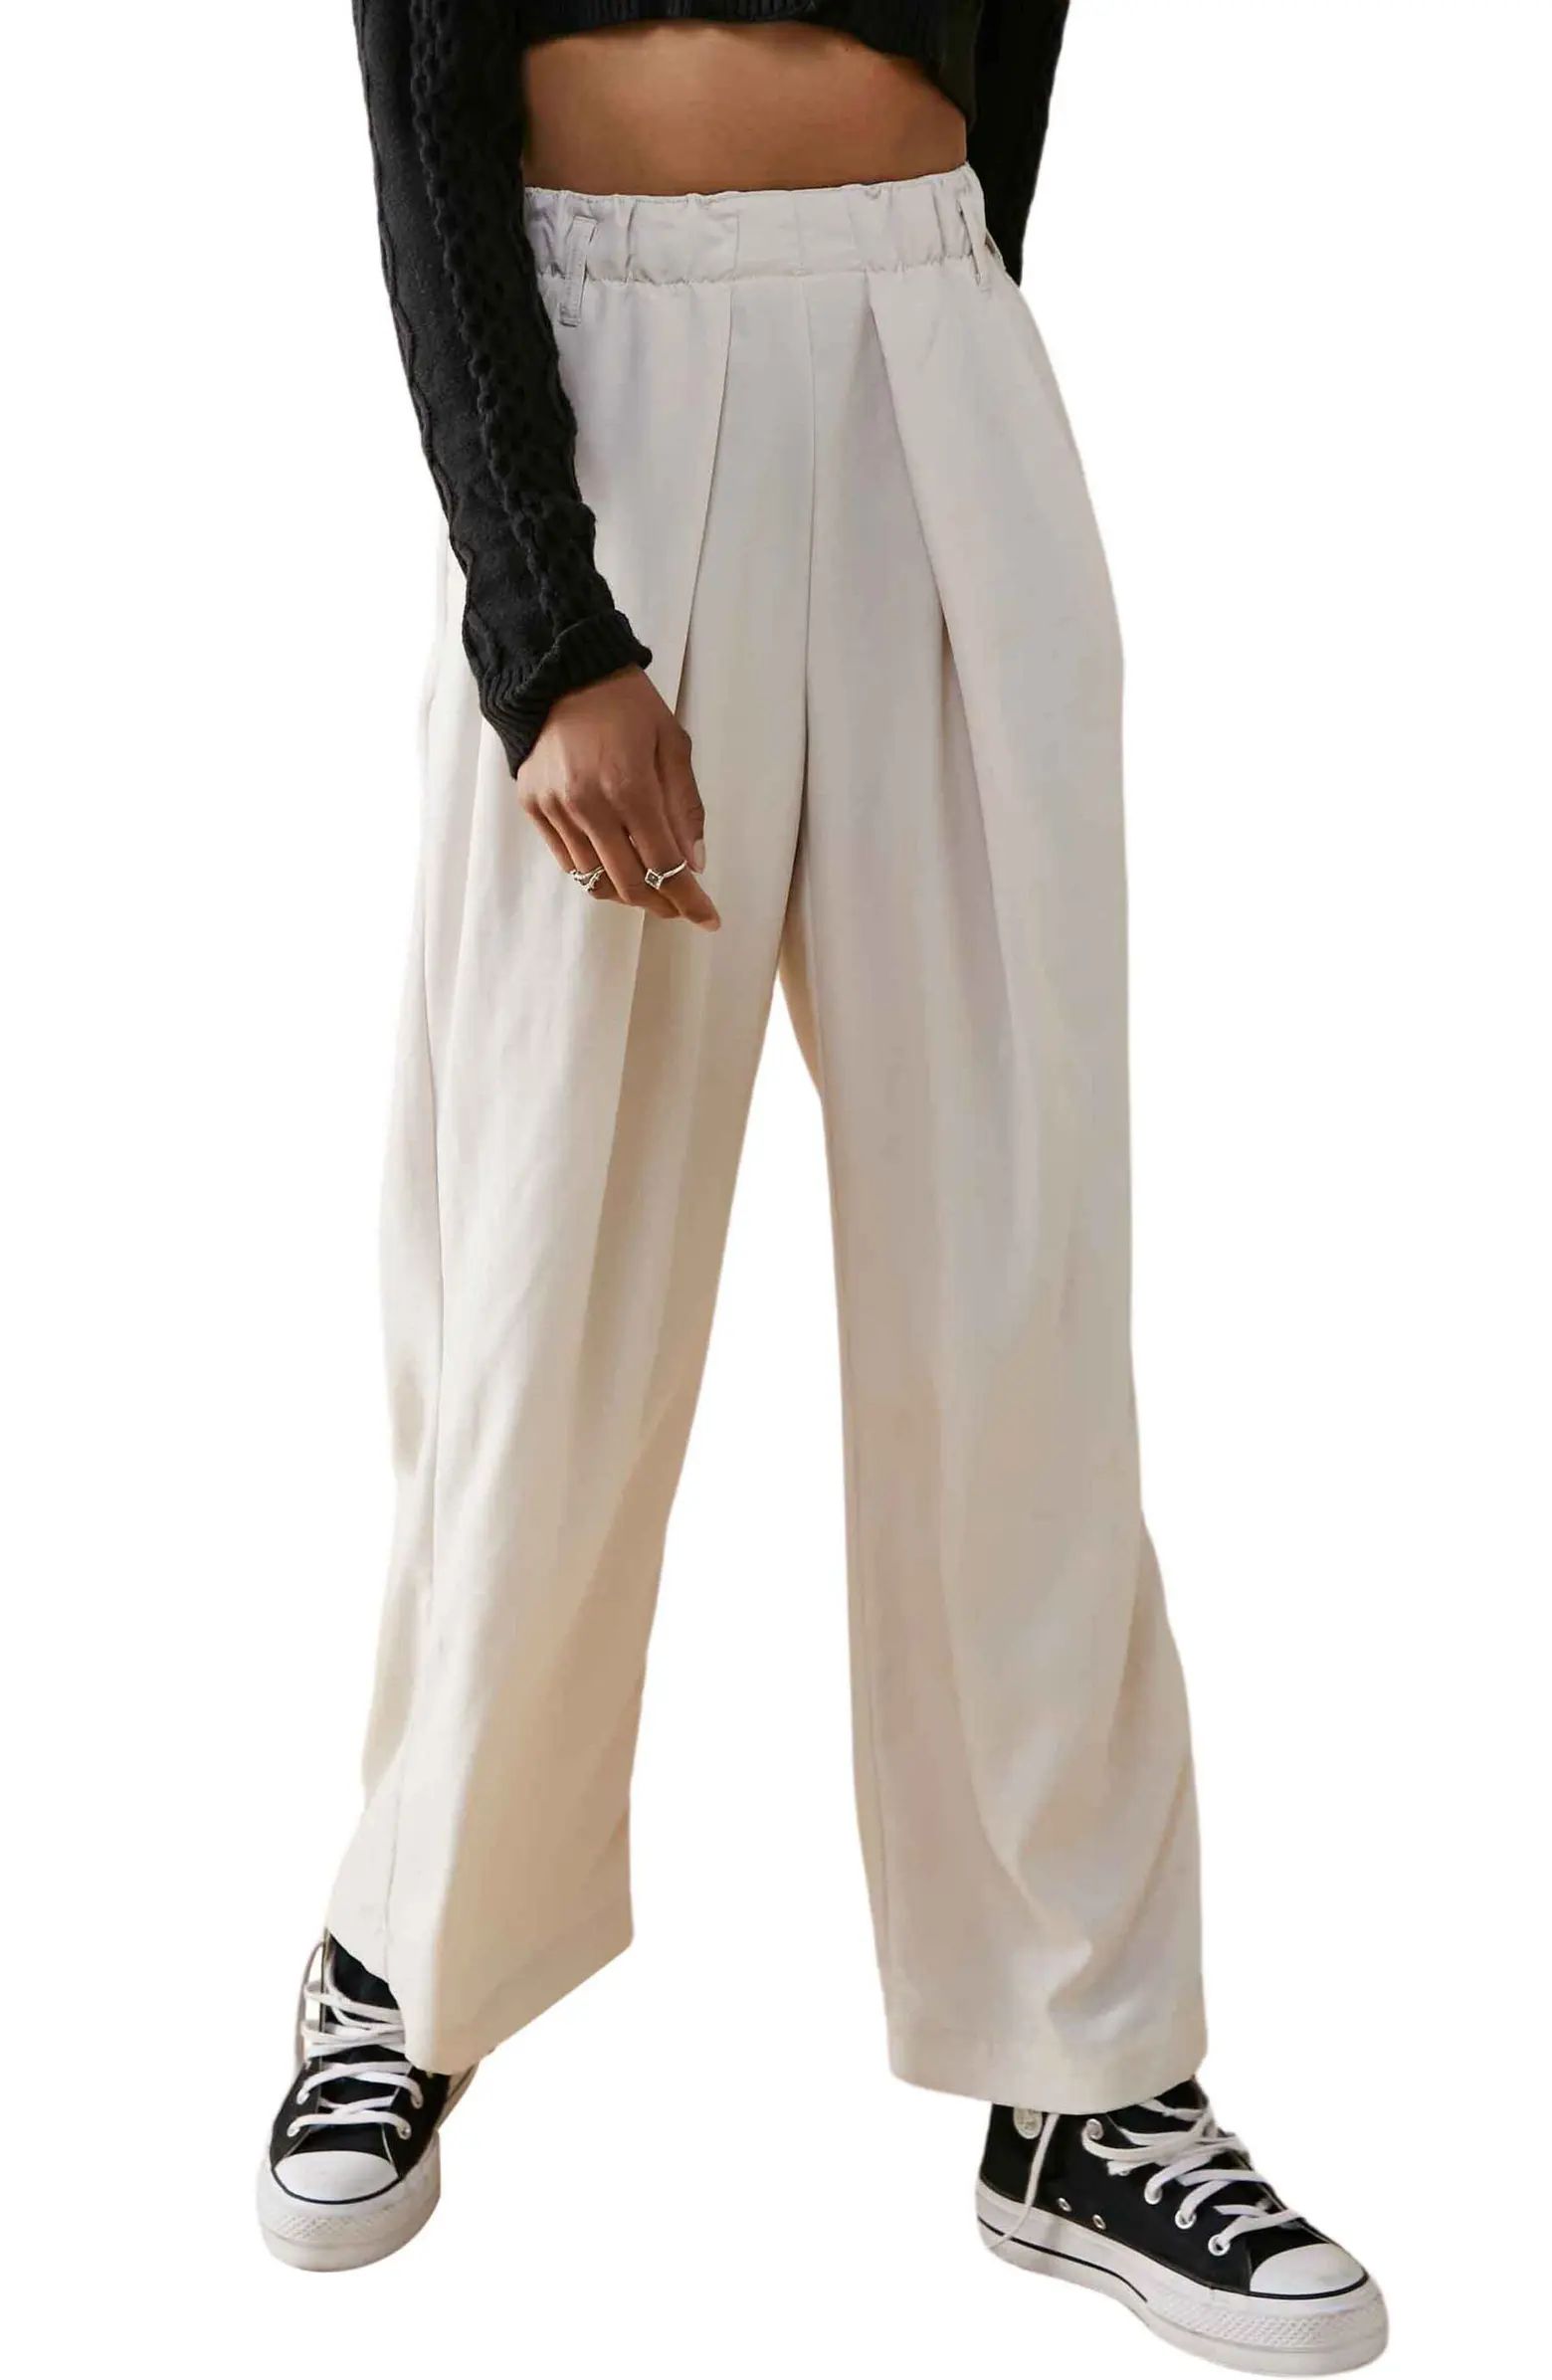 Nothin' to Say Elastic Waist Pants | Nordstrom